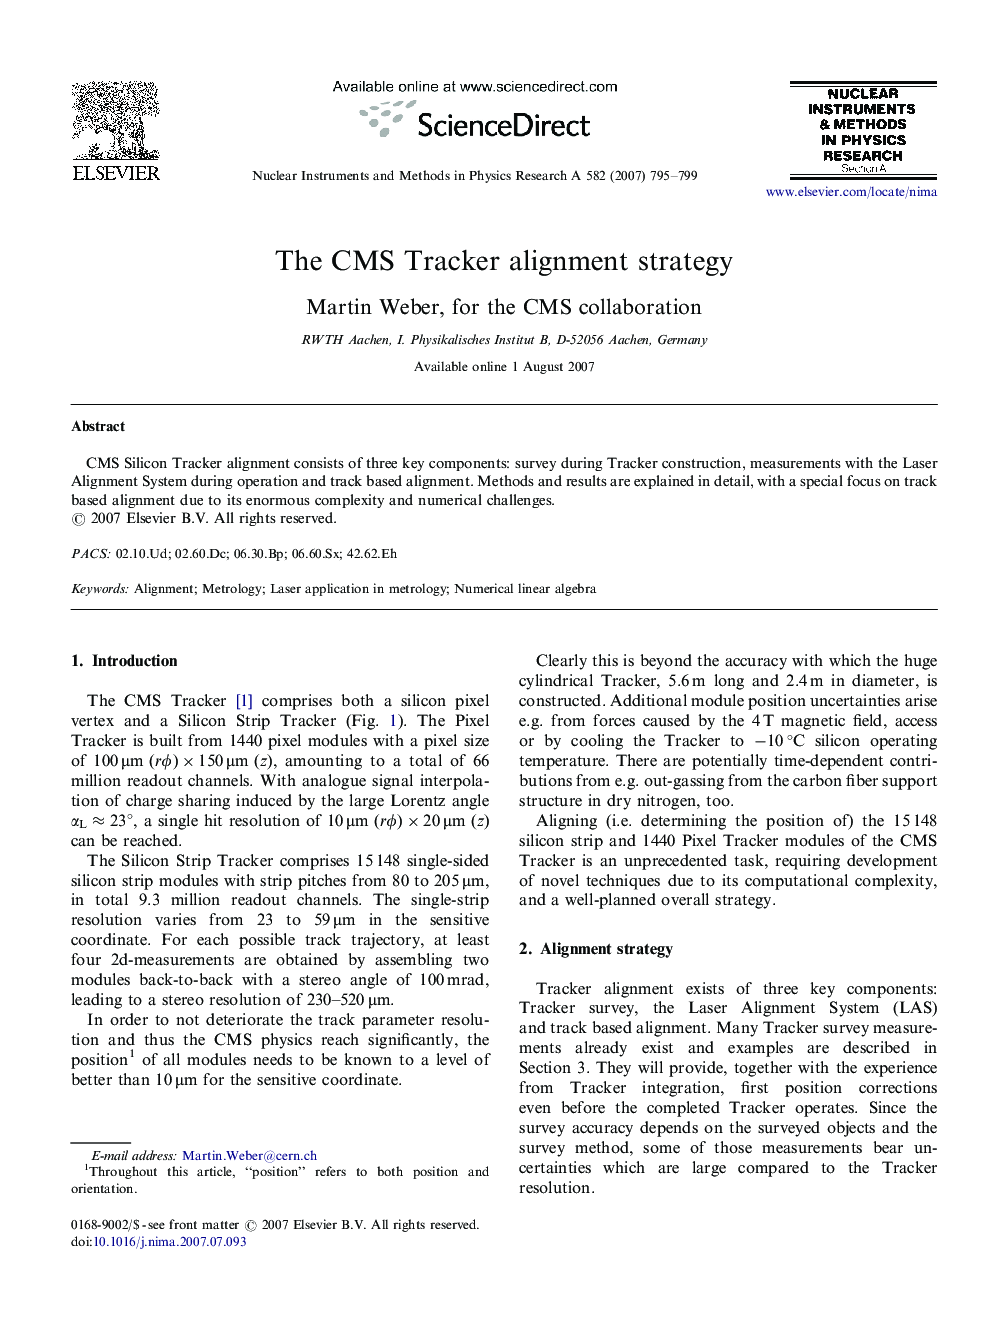 The CMS Tracker alignment strategy